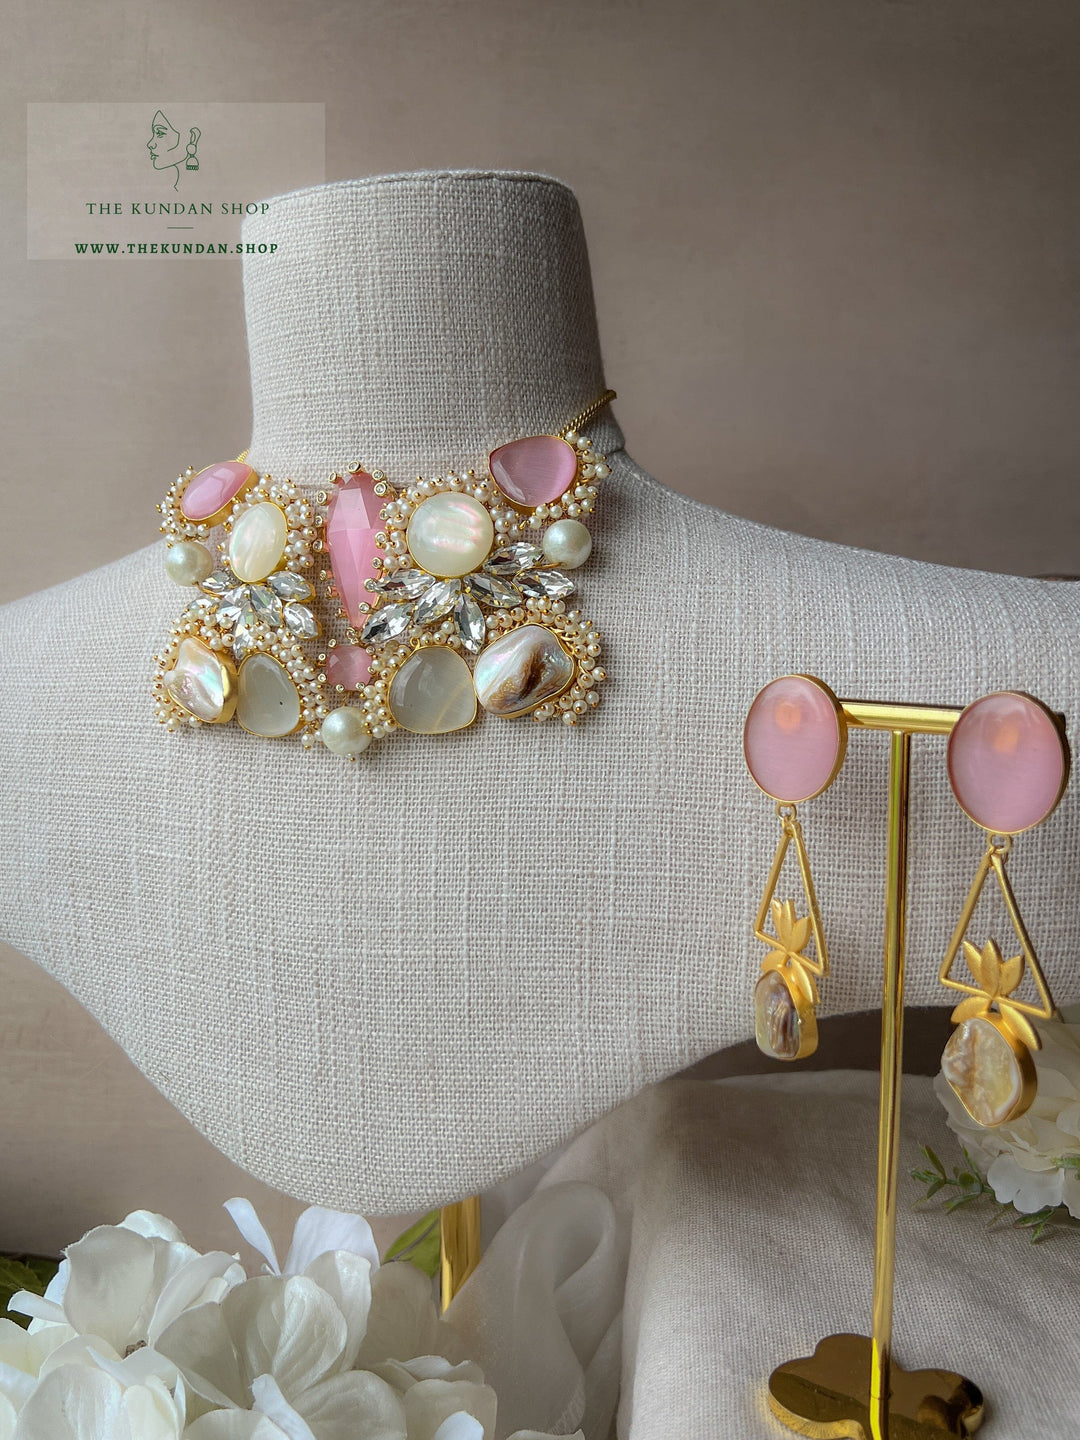 Impeccable Pink & Pearl Necklace Sets THE KUNDAN SHOP 